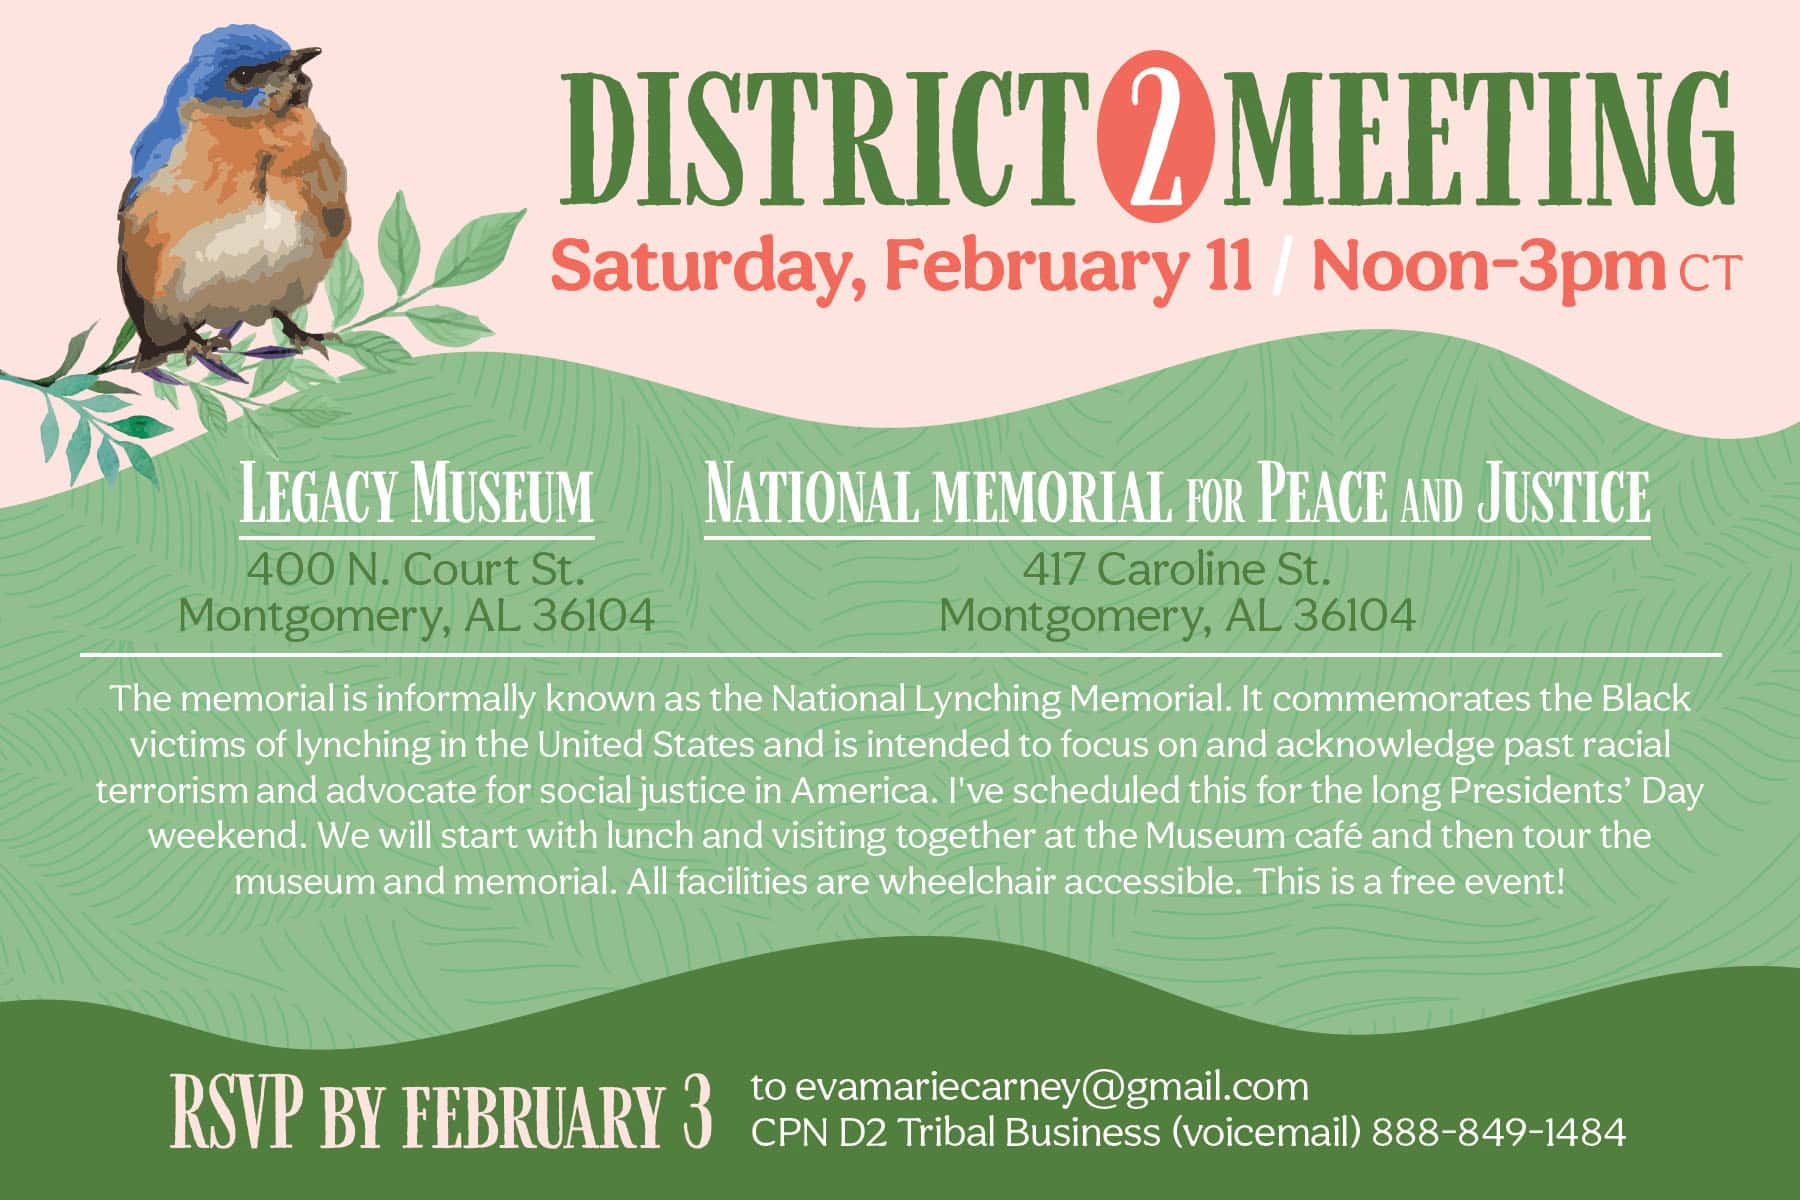 This District 2 meeting will take place at the Legacy Museum and National Memorial for Peace and Justice in Montgomery, AL, on Saturday, February 11, 2023, from noon to 3 p.m. CT. The memorial is informally known as the National Lynching Memorial. It commemorates the Black victims of lynching in the United States and is intended to focus on and acknowledge past racial terrorism and advocate for social justice in America. District Legislator Eva Marie Carney has scheduled this event for the long Presidents Day weekend. The event will start with lunch and visiting together at the Museum cafe, followed by a tour of the museum and memorial. All facilities are wheelchair accessible. This is a free event! RSVP by February 3, 2023, to evamariecarney@gmail.com or by calling 888-849-1484 (CPN D2 Tribal Business voicemail).